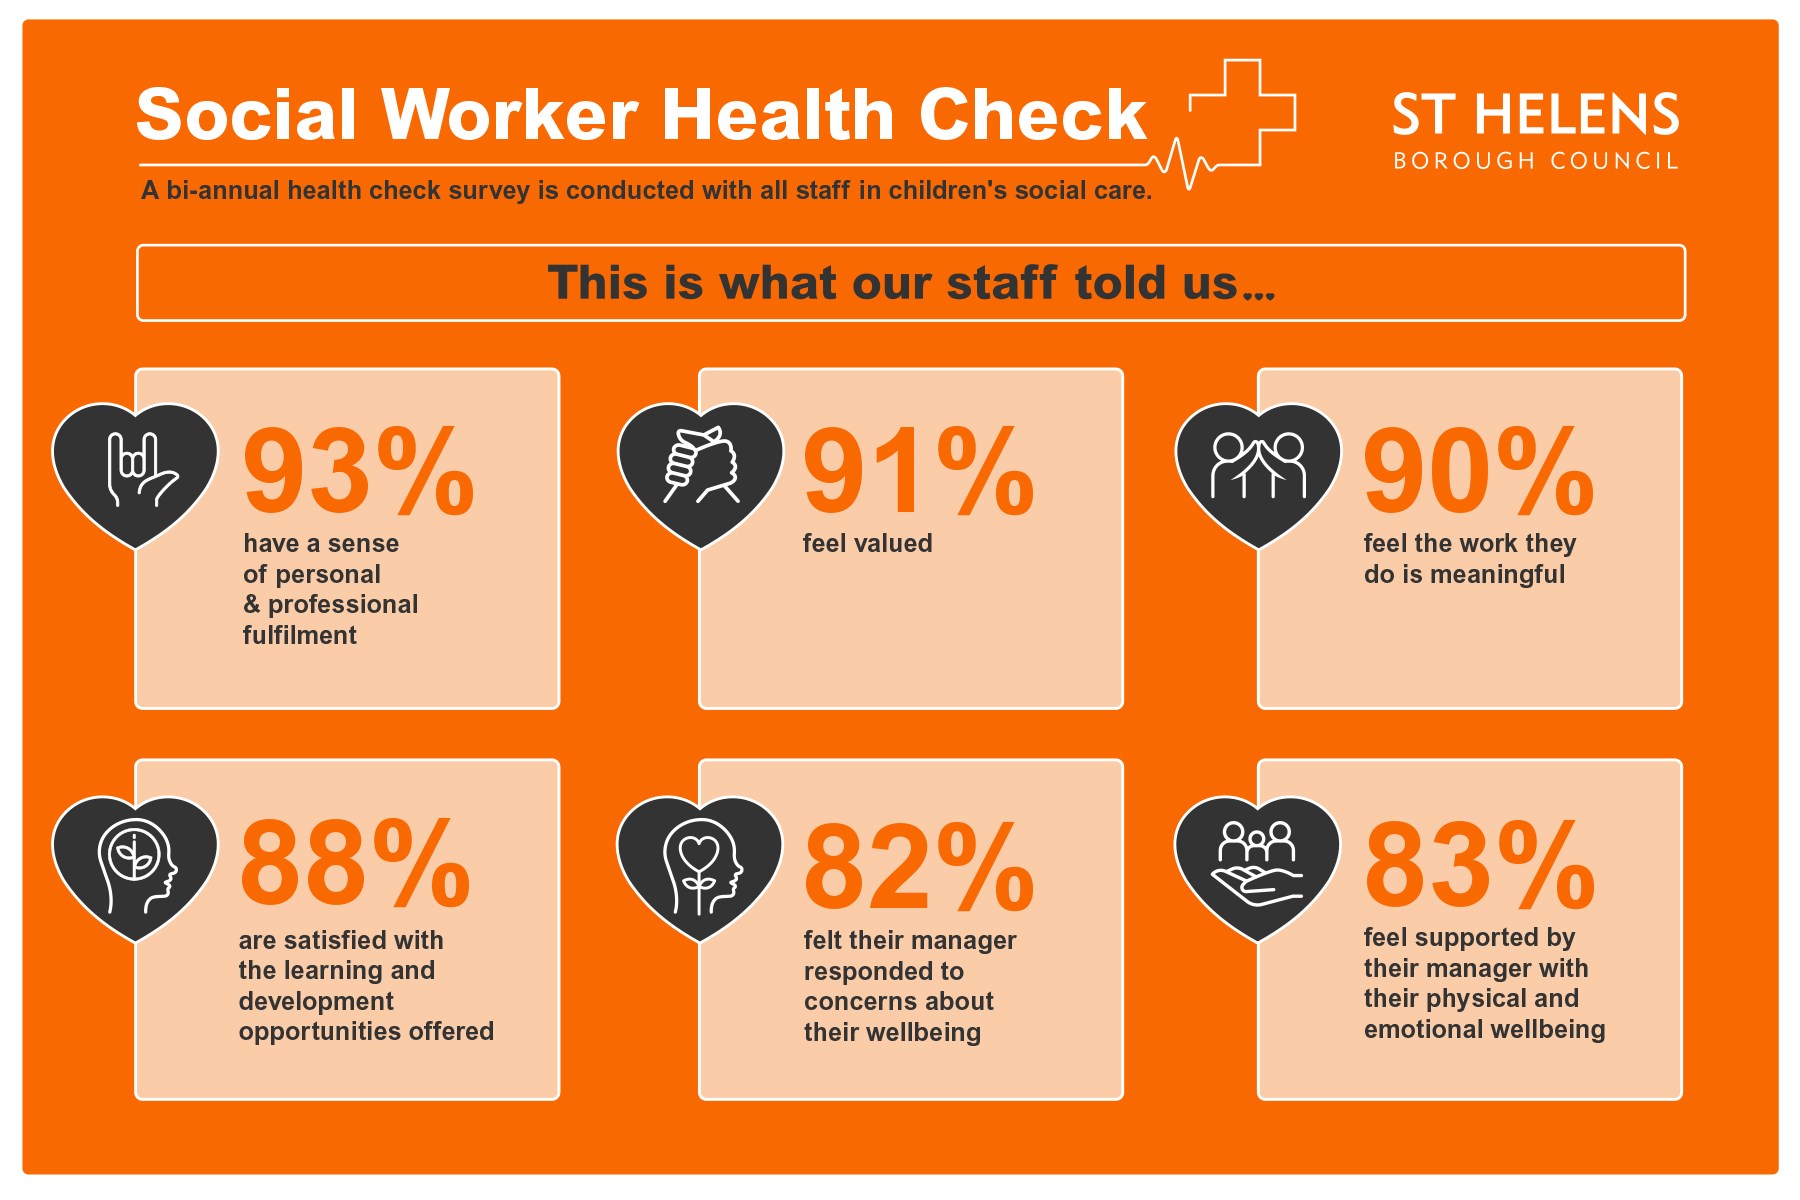 Social worker health check infographic